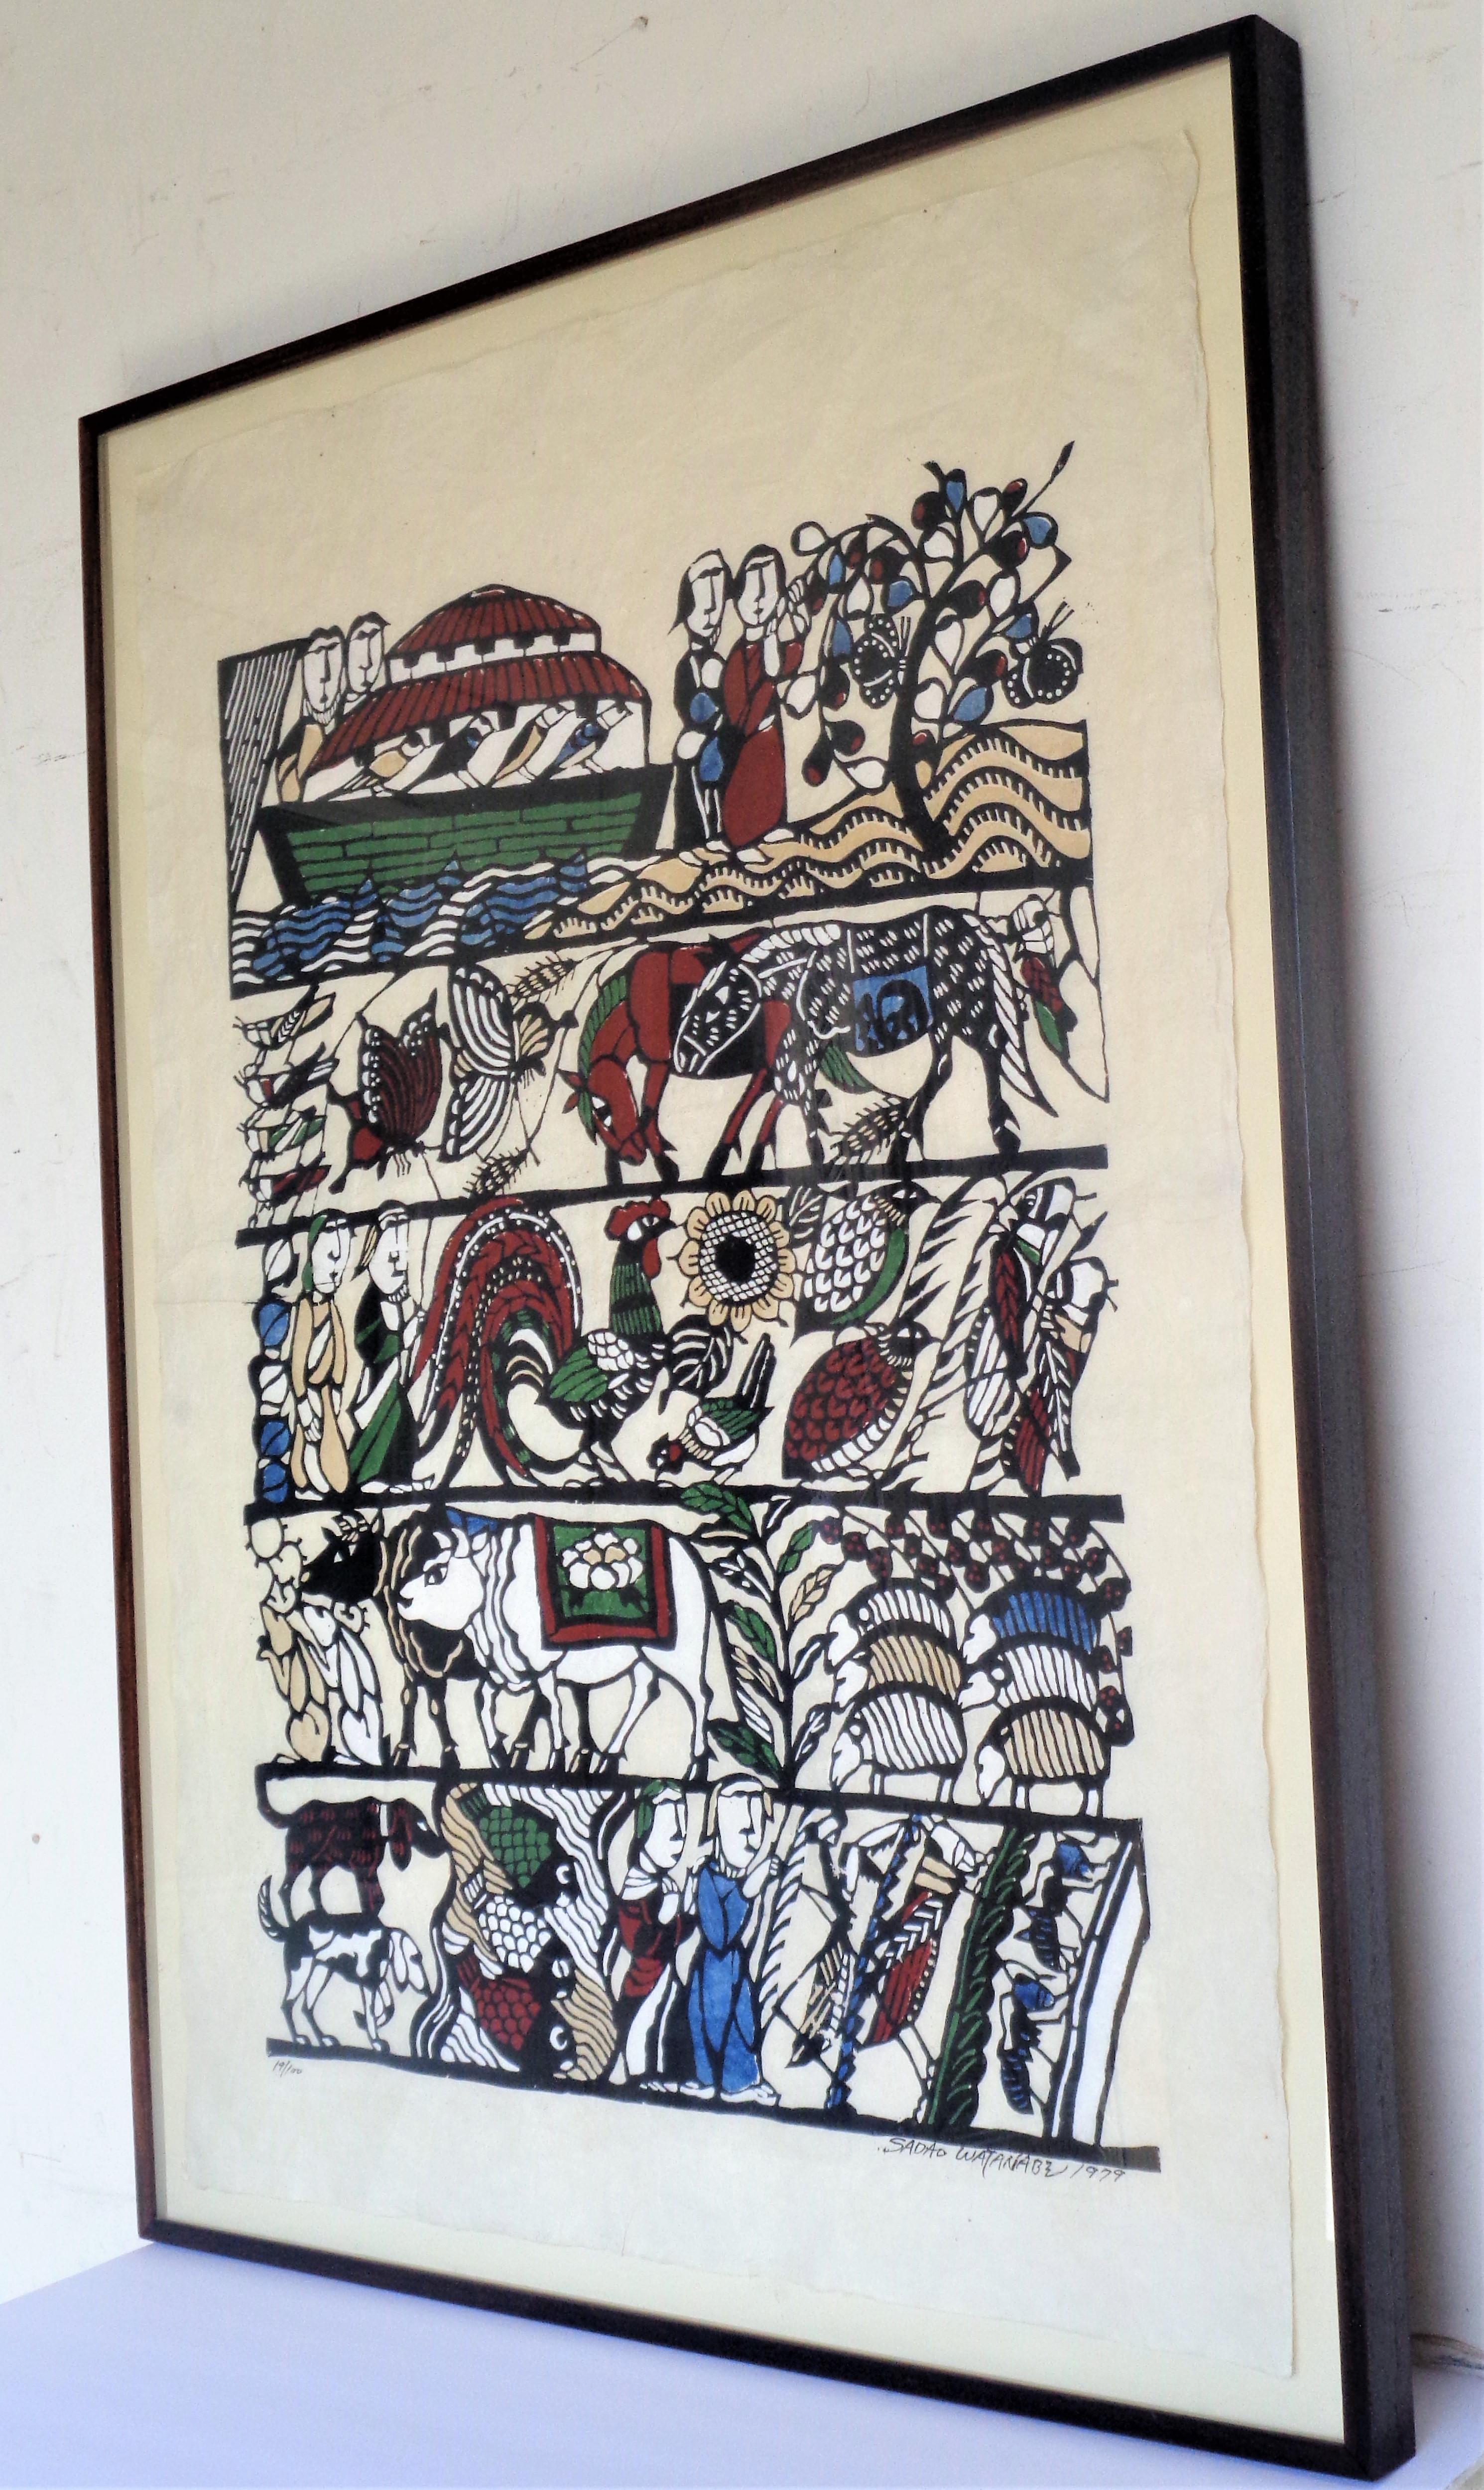 A rare oversized hand painted stencil print on hand crafted crumpled Momigami paper of Noah's Ark ( Old Testament Series ) by Sadao Watanabe ( 1913-1996 ) signed in black ink lower right Sadao Watanabe 1979 / numbered lower left 19/100. Great all